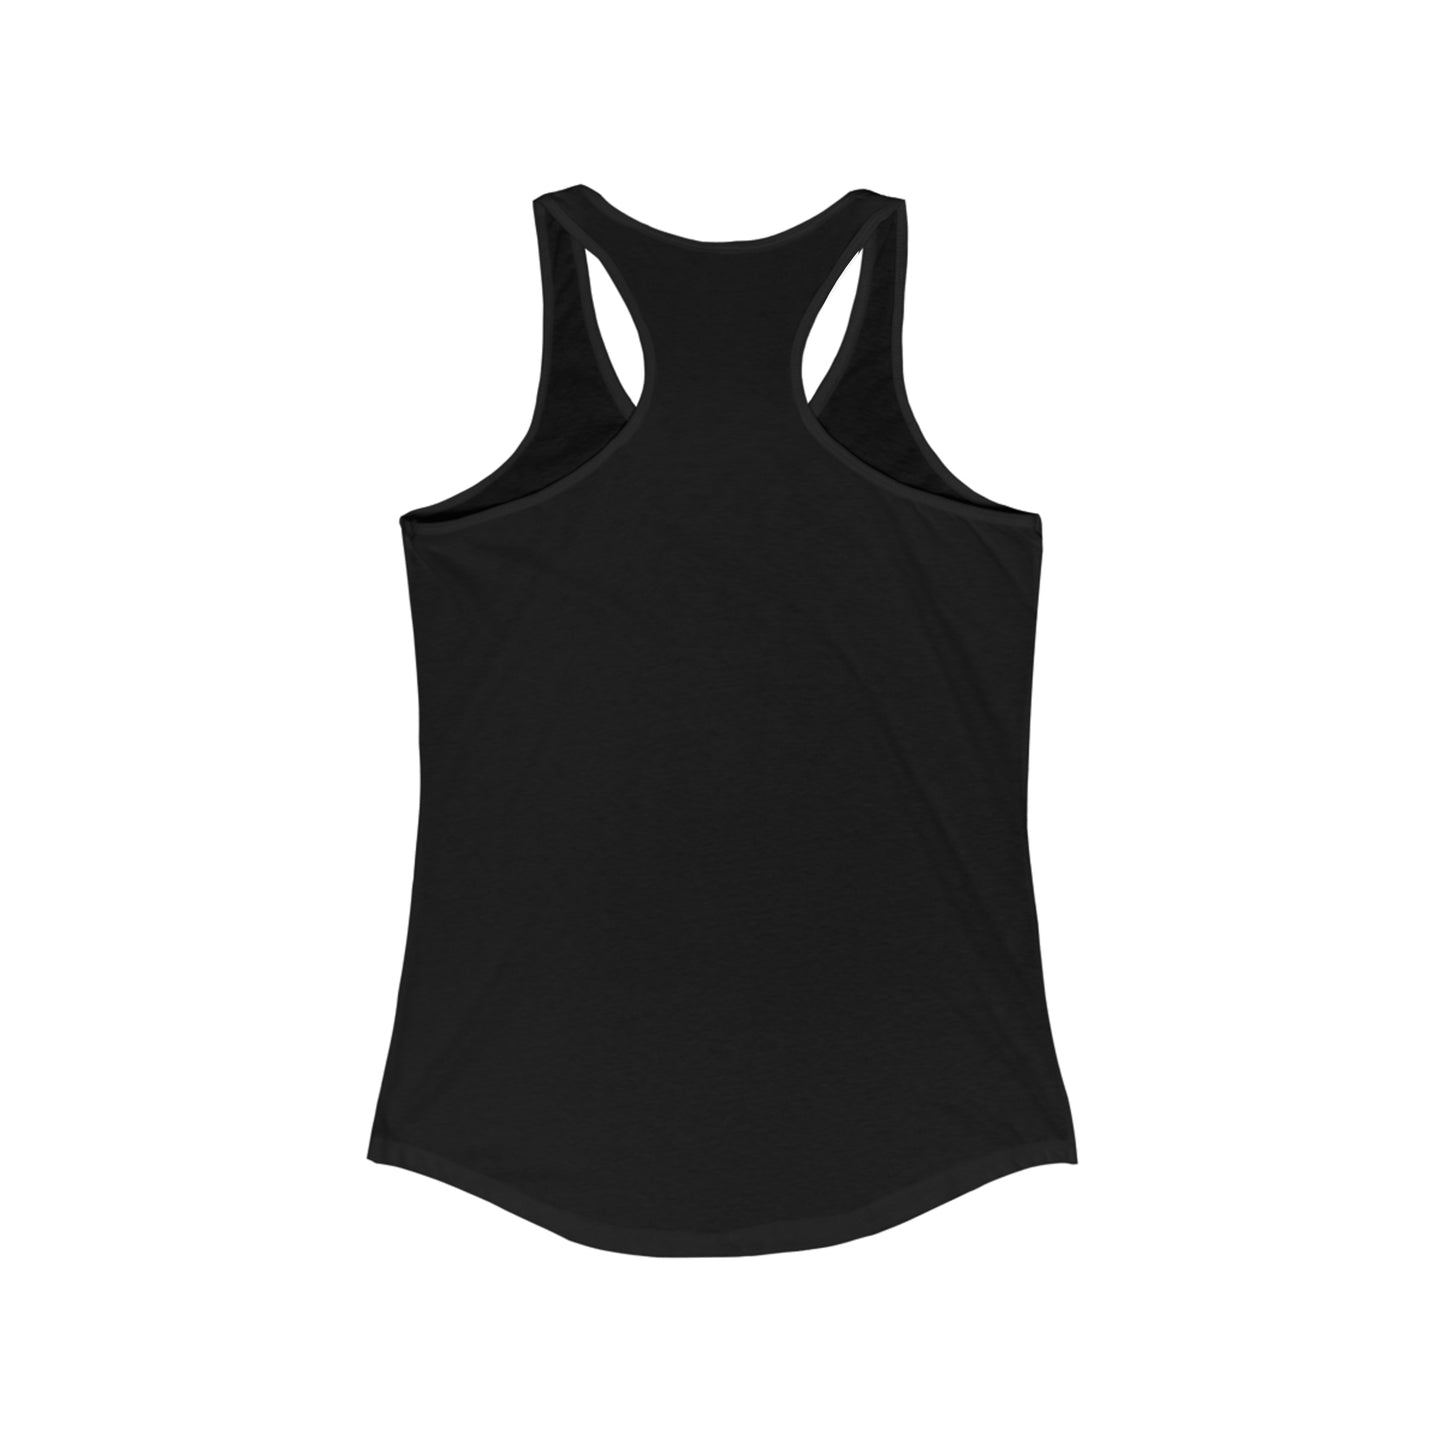 Breaking All The Rules/ Black Racerback Tank Top